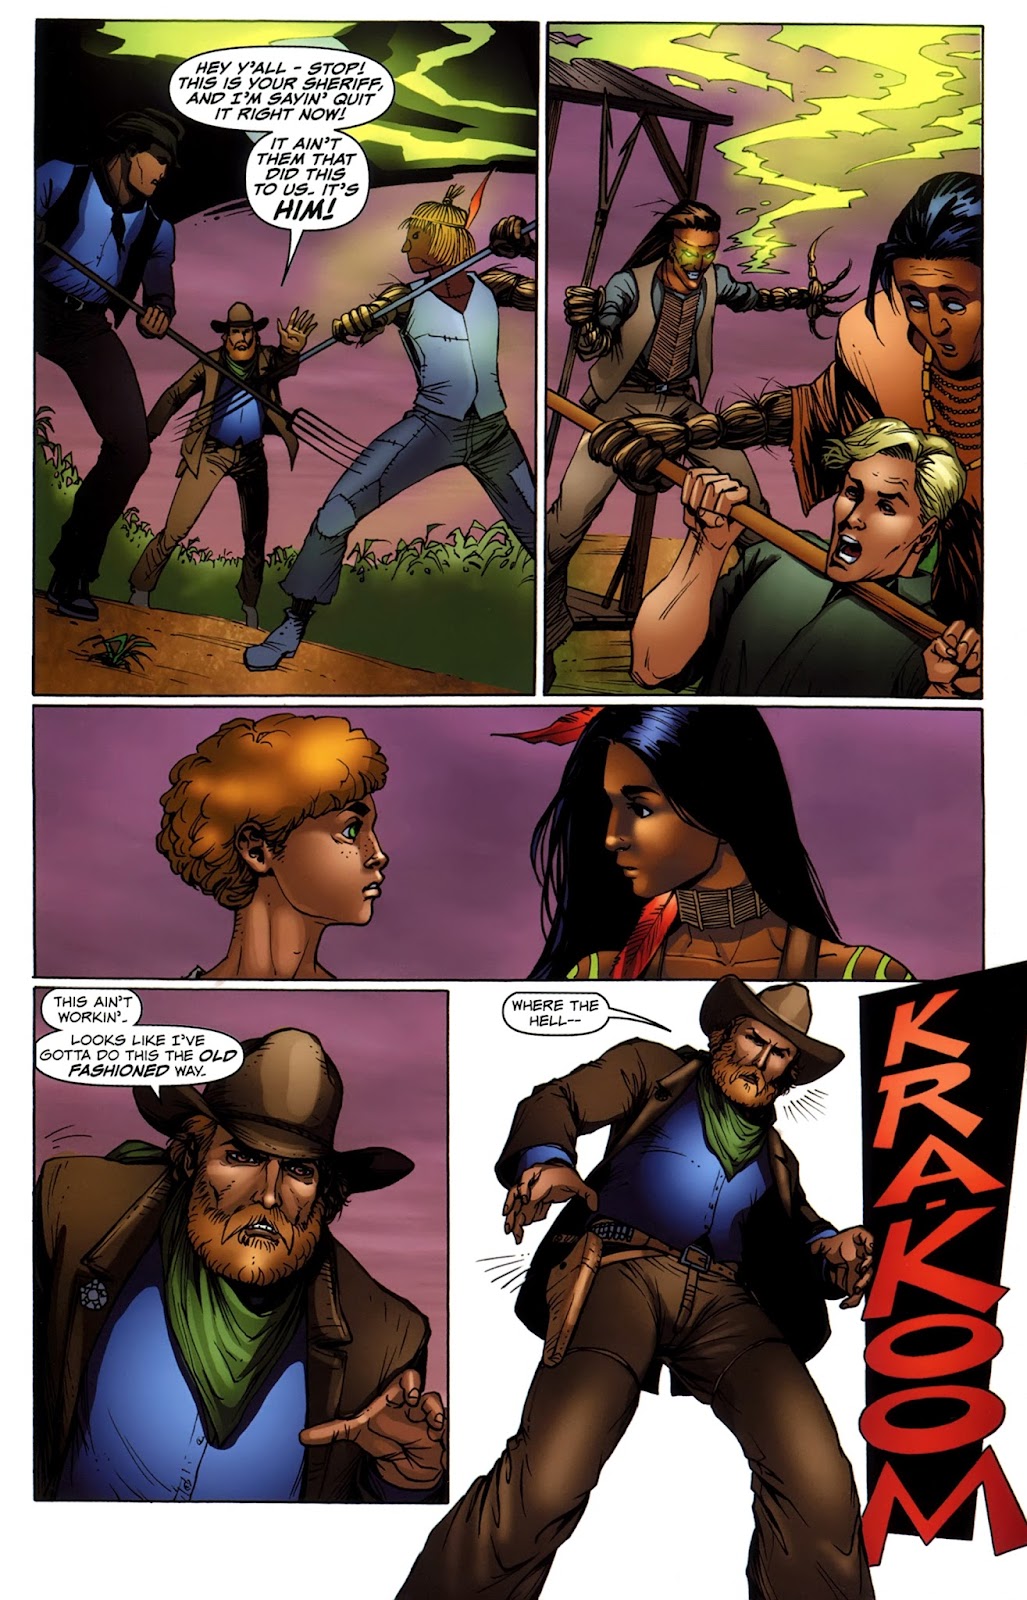 Legends of Oz: The Scarecrow issue 2 - Page 13